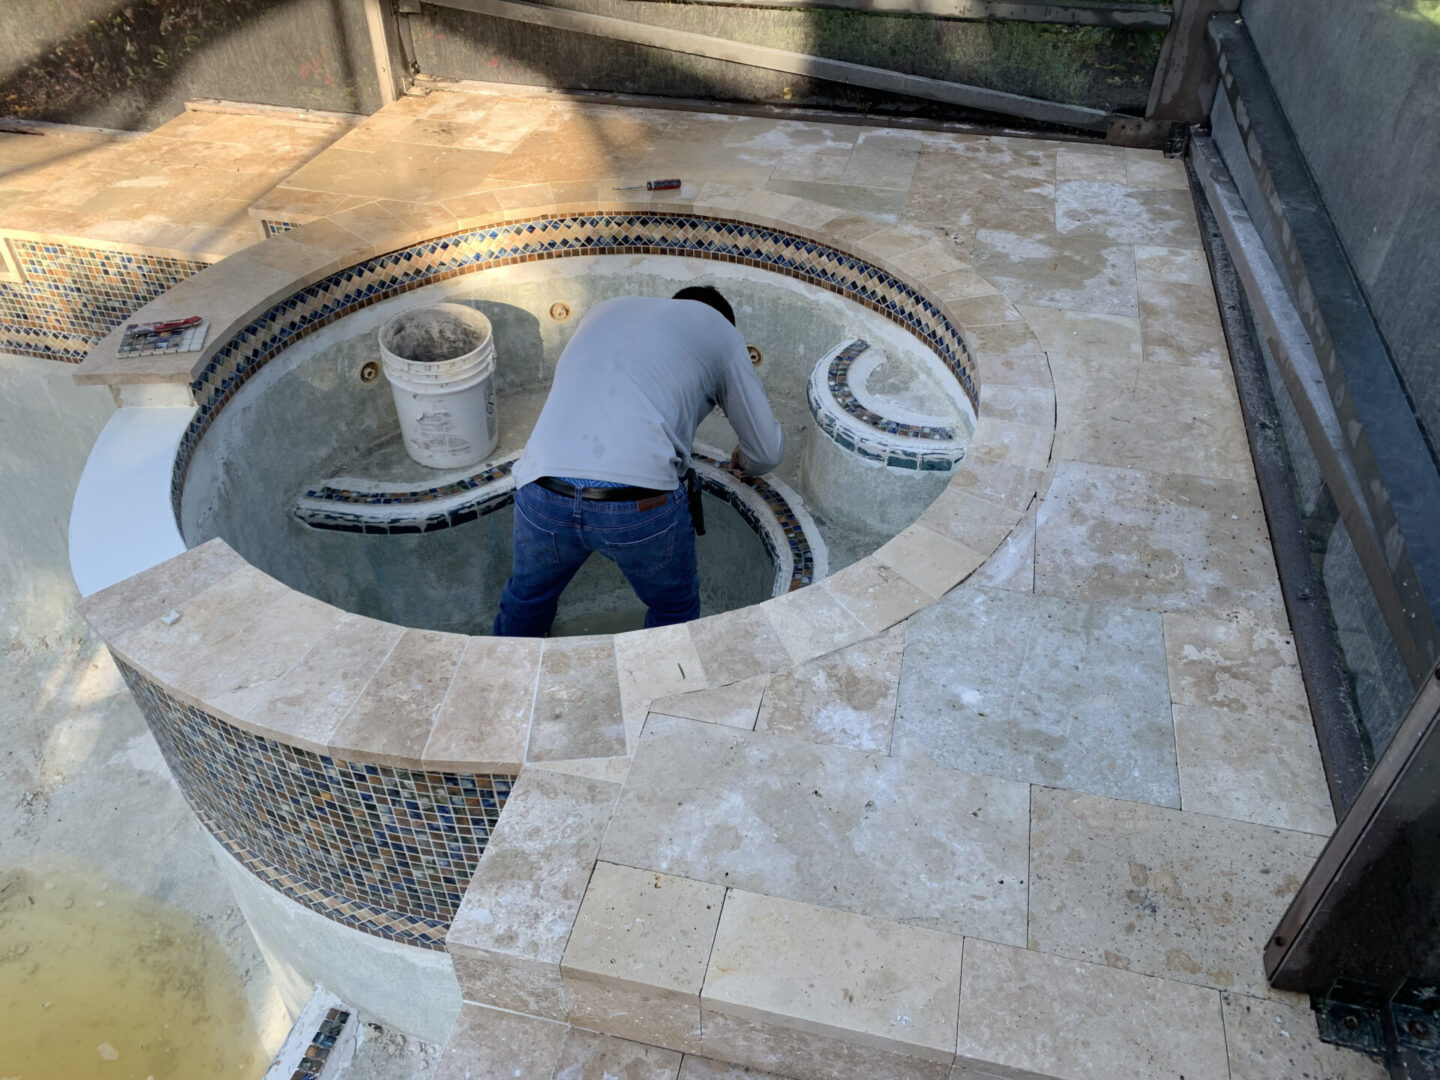 A person wearing a gray shirt and jeans works inside an empty, circular hot tub. The surrounding area features tiled edges and a bucket situated inside the tub.